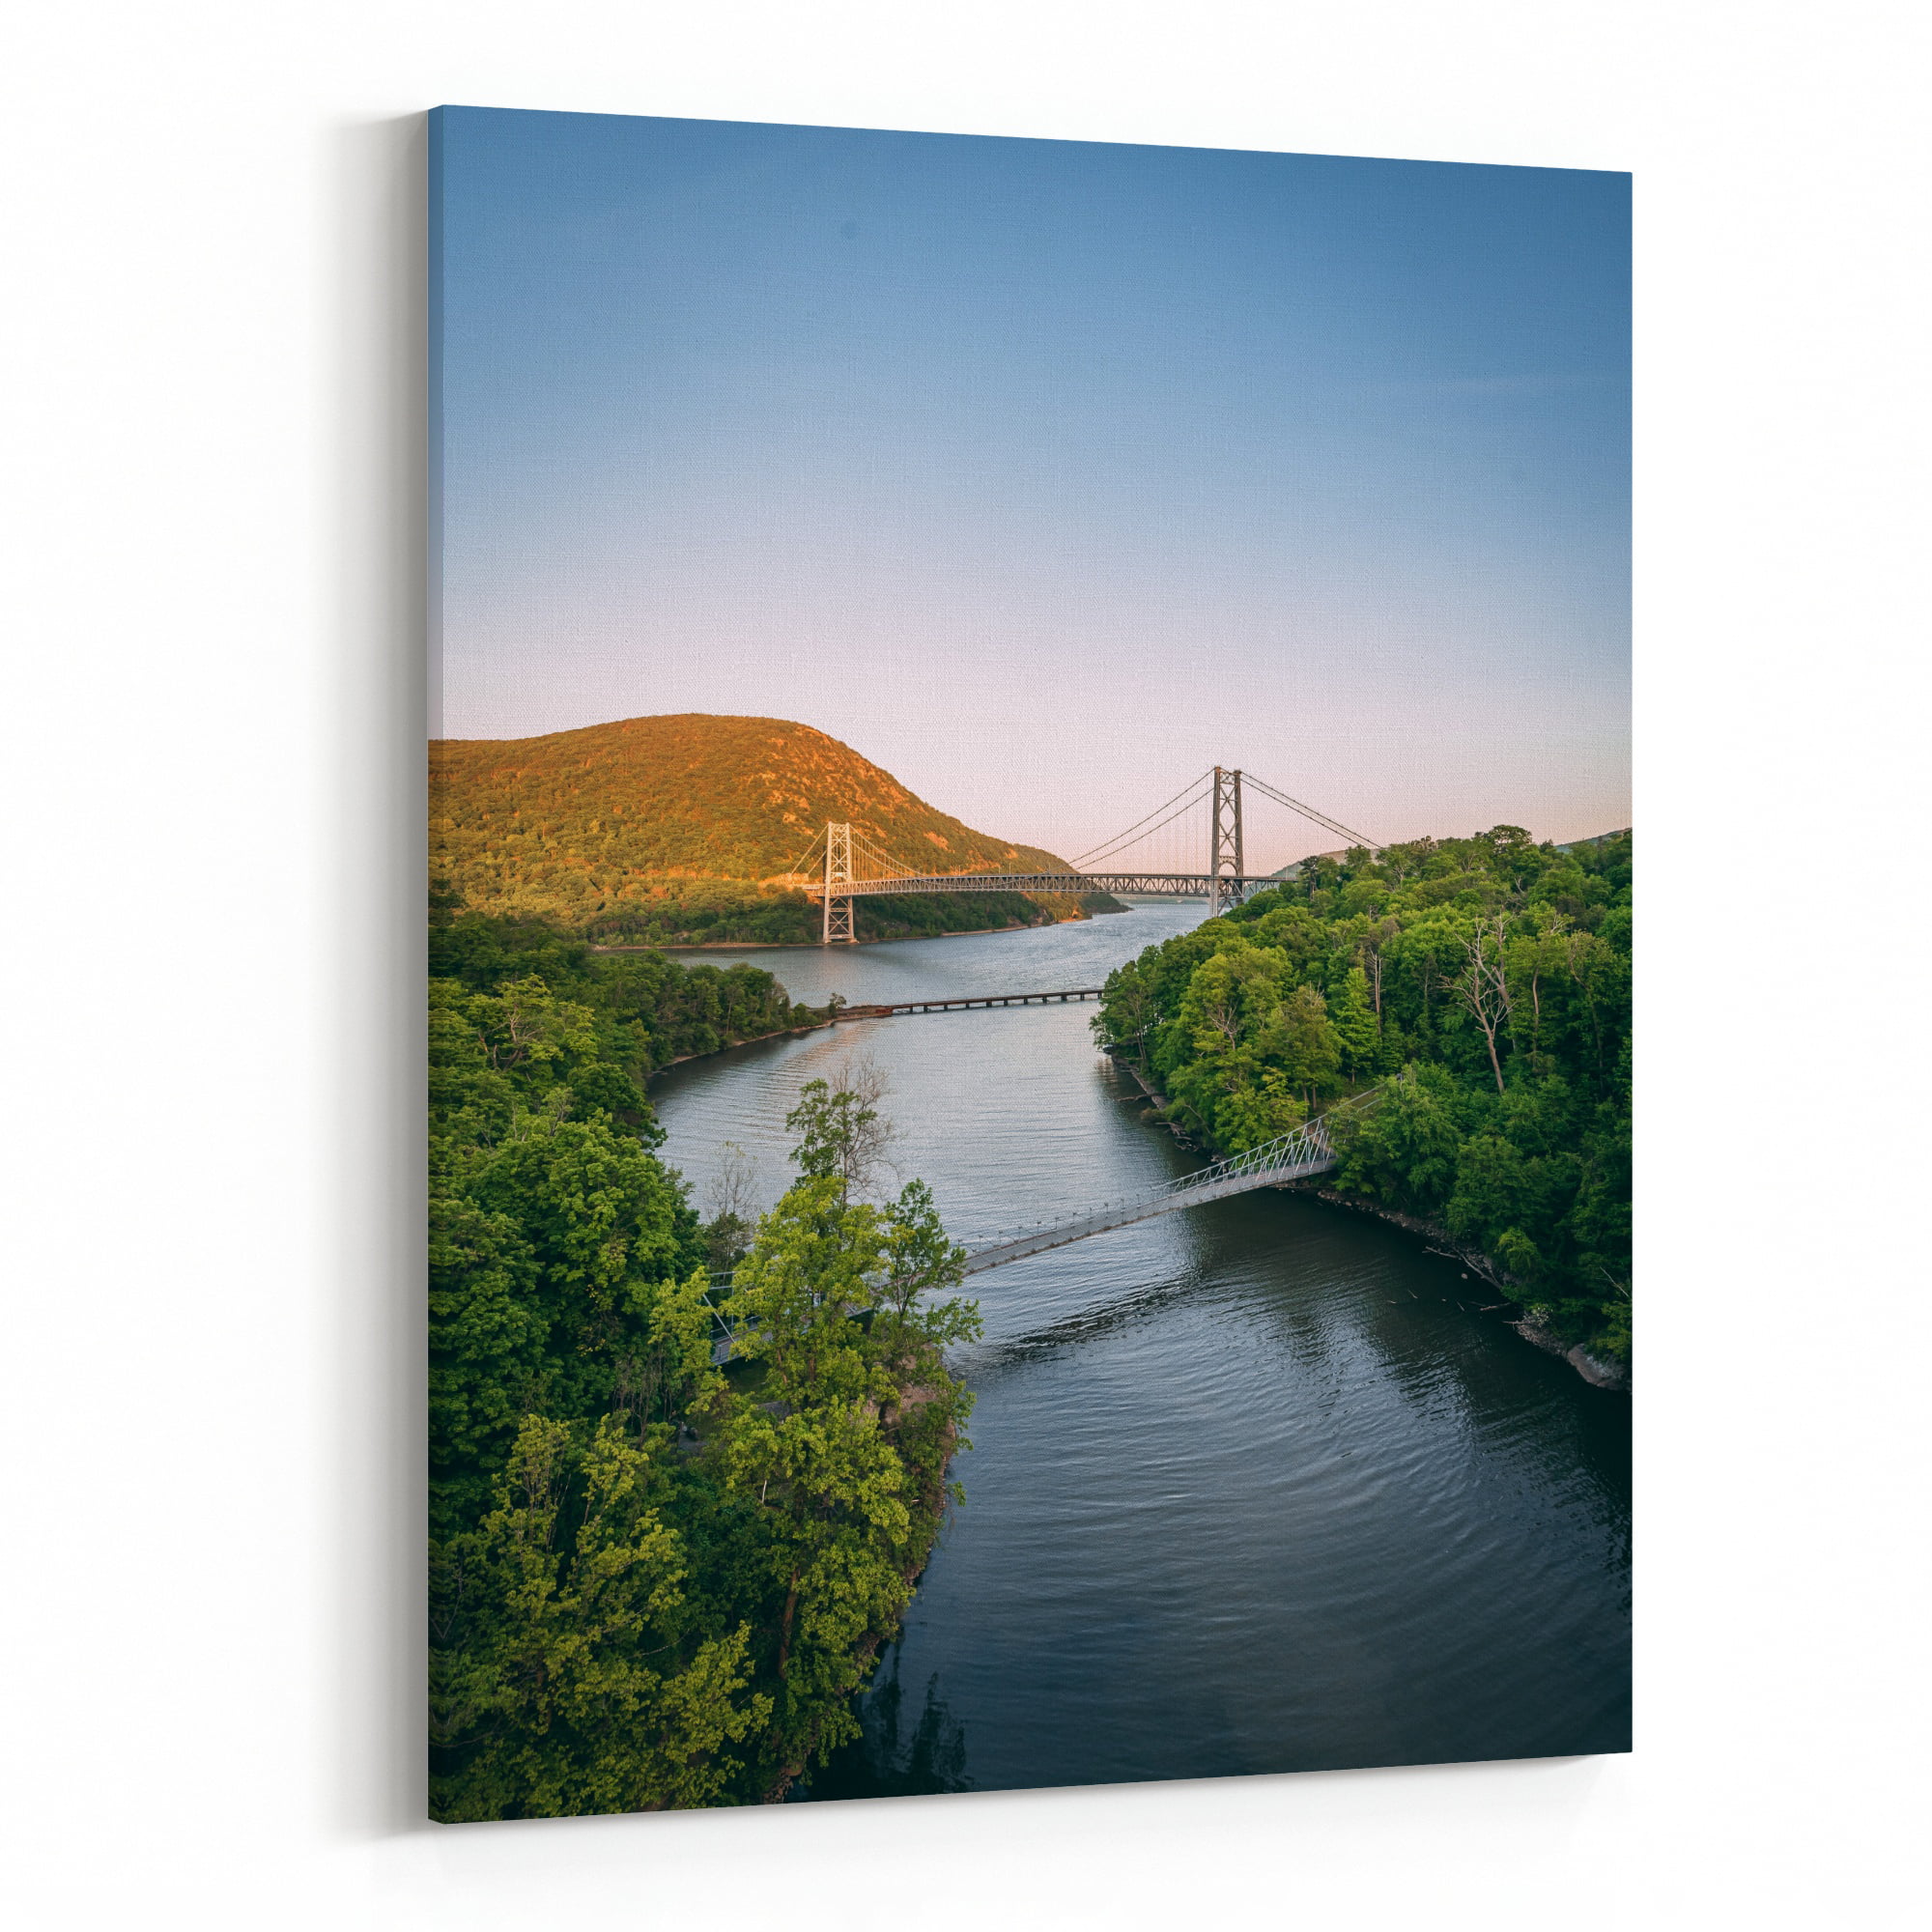 12"x18"Great Bridge HD Canvas prints Painting Home Decor Picture Wall art Poster 